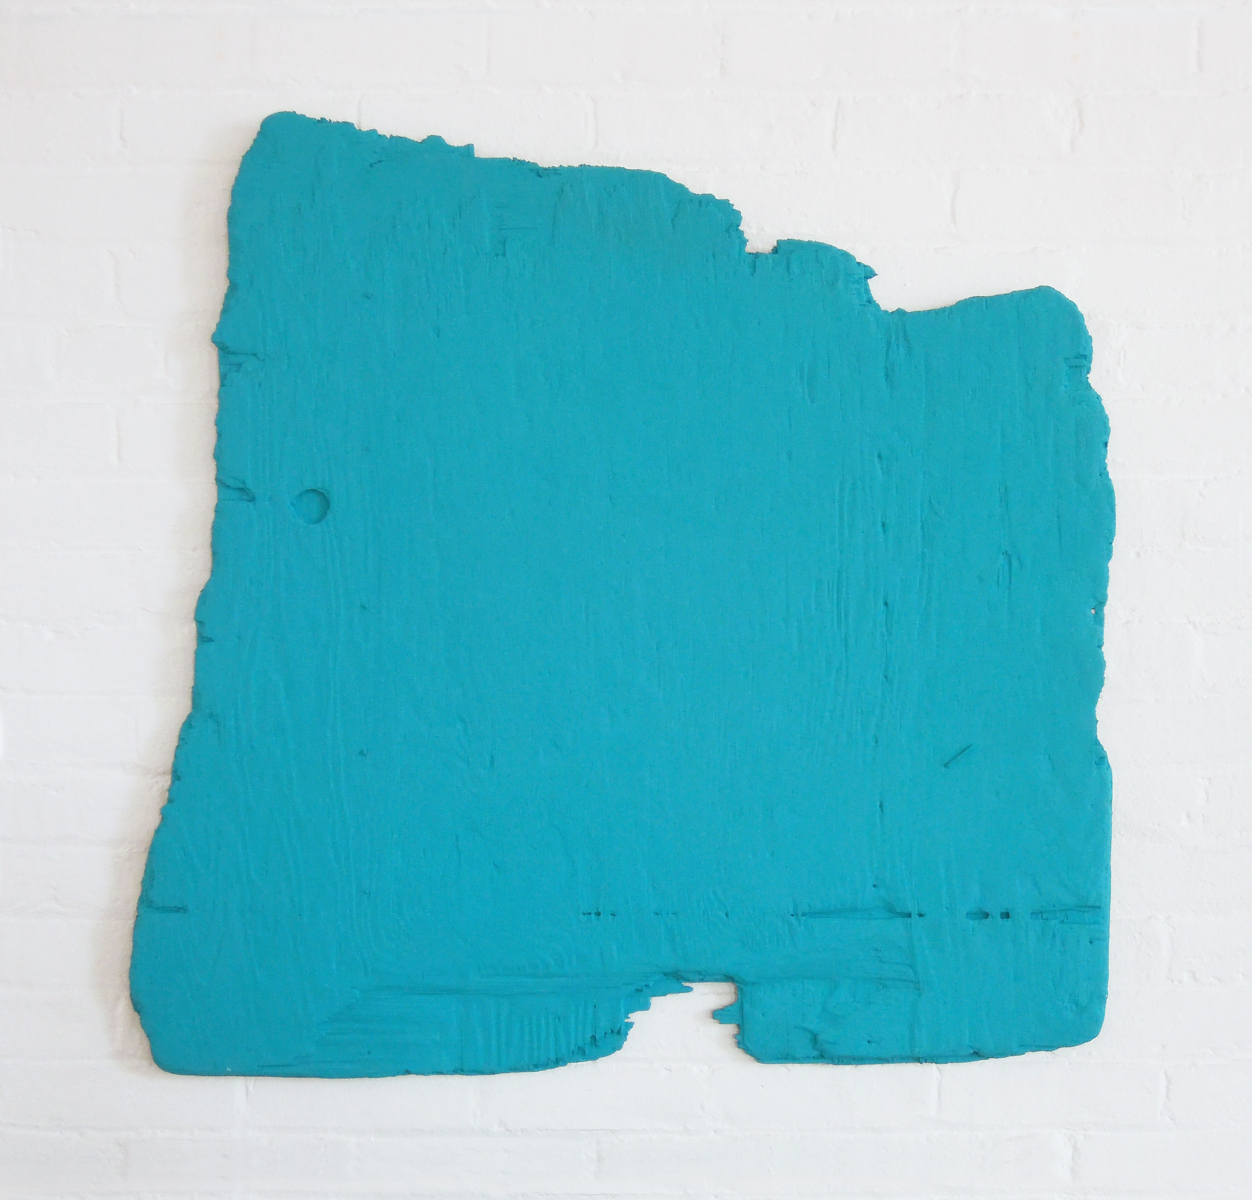 An irregularly shaped piece of plywood completely covered in turquoise paint.